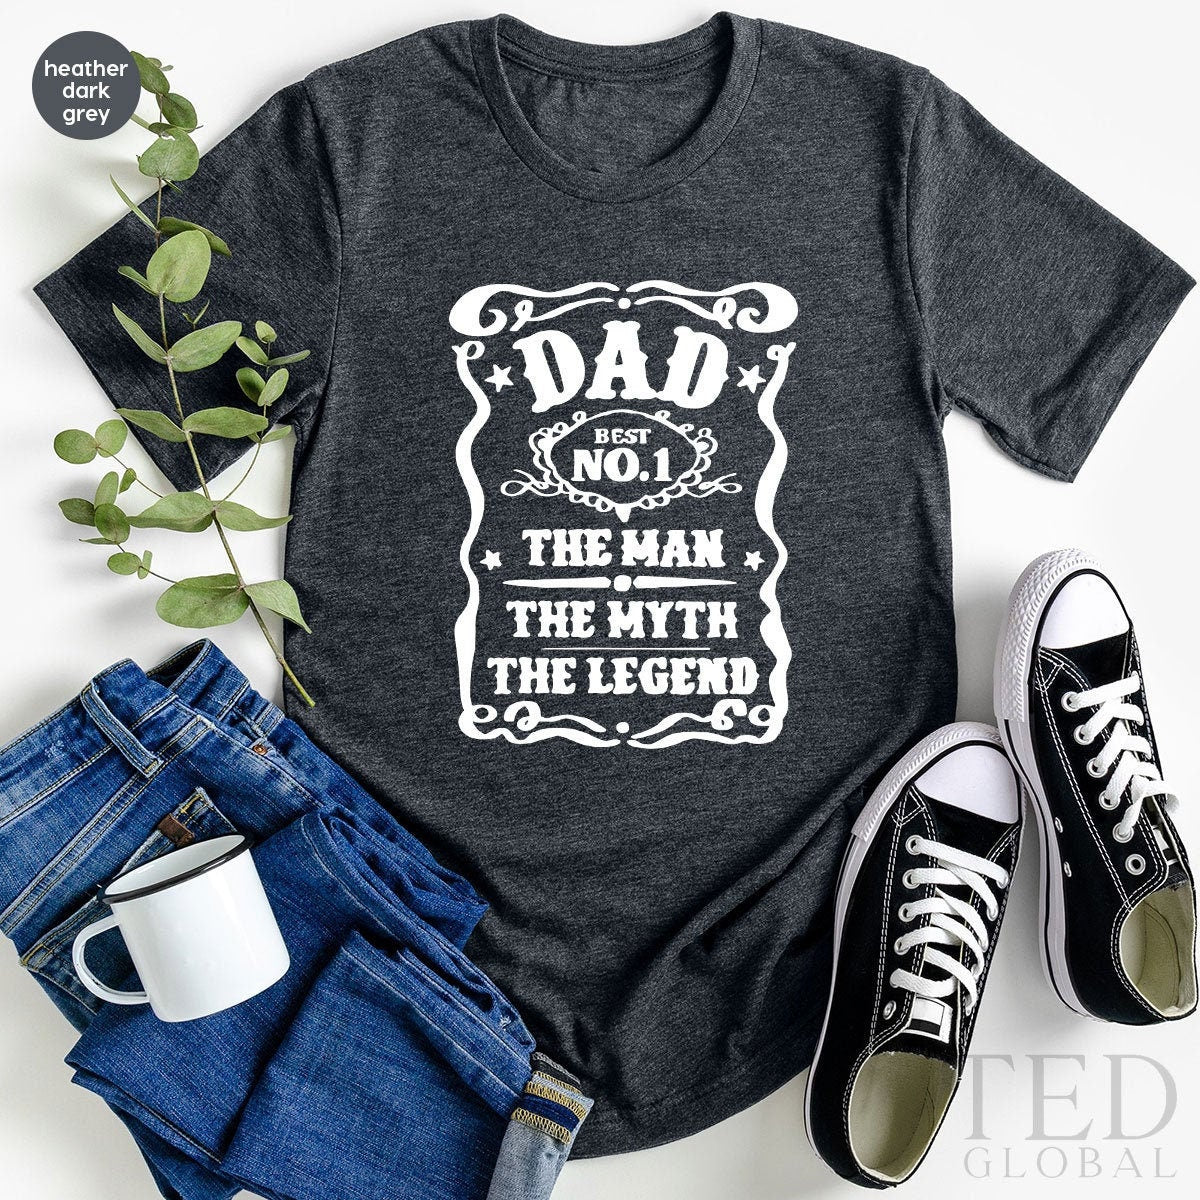 Funny Dad Shirt, Fathers Day Tee, Gift For Dad, Dad Shirt, Best Dad Shirt, Dad To Shirt, Fathers Day Gifts, Gift For Husband, Cool Dad Shirt - Fastdeliverytees.com